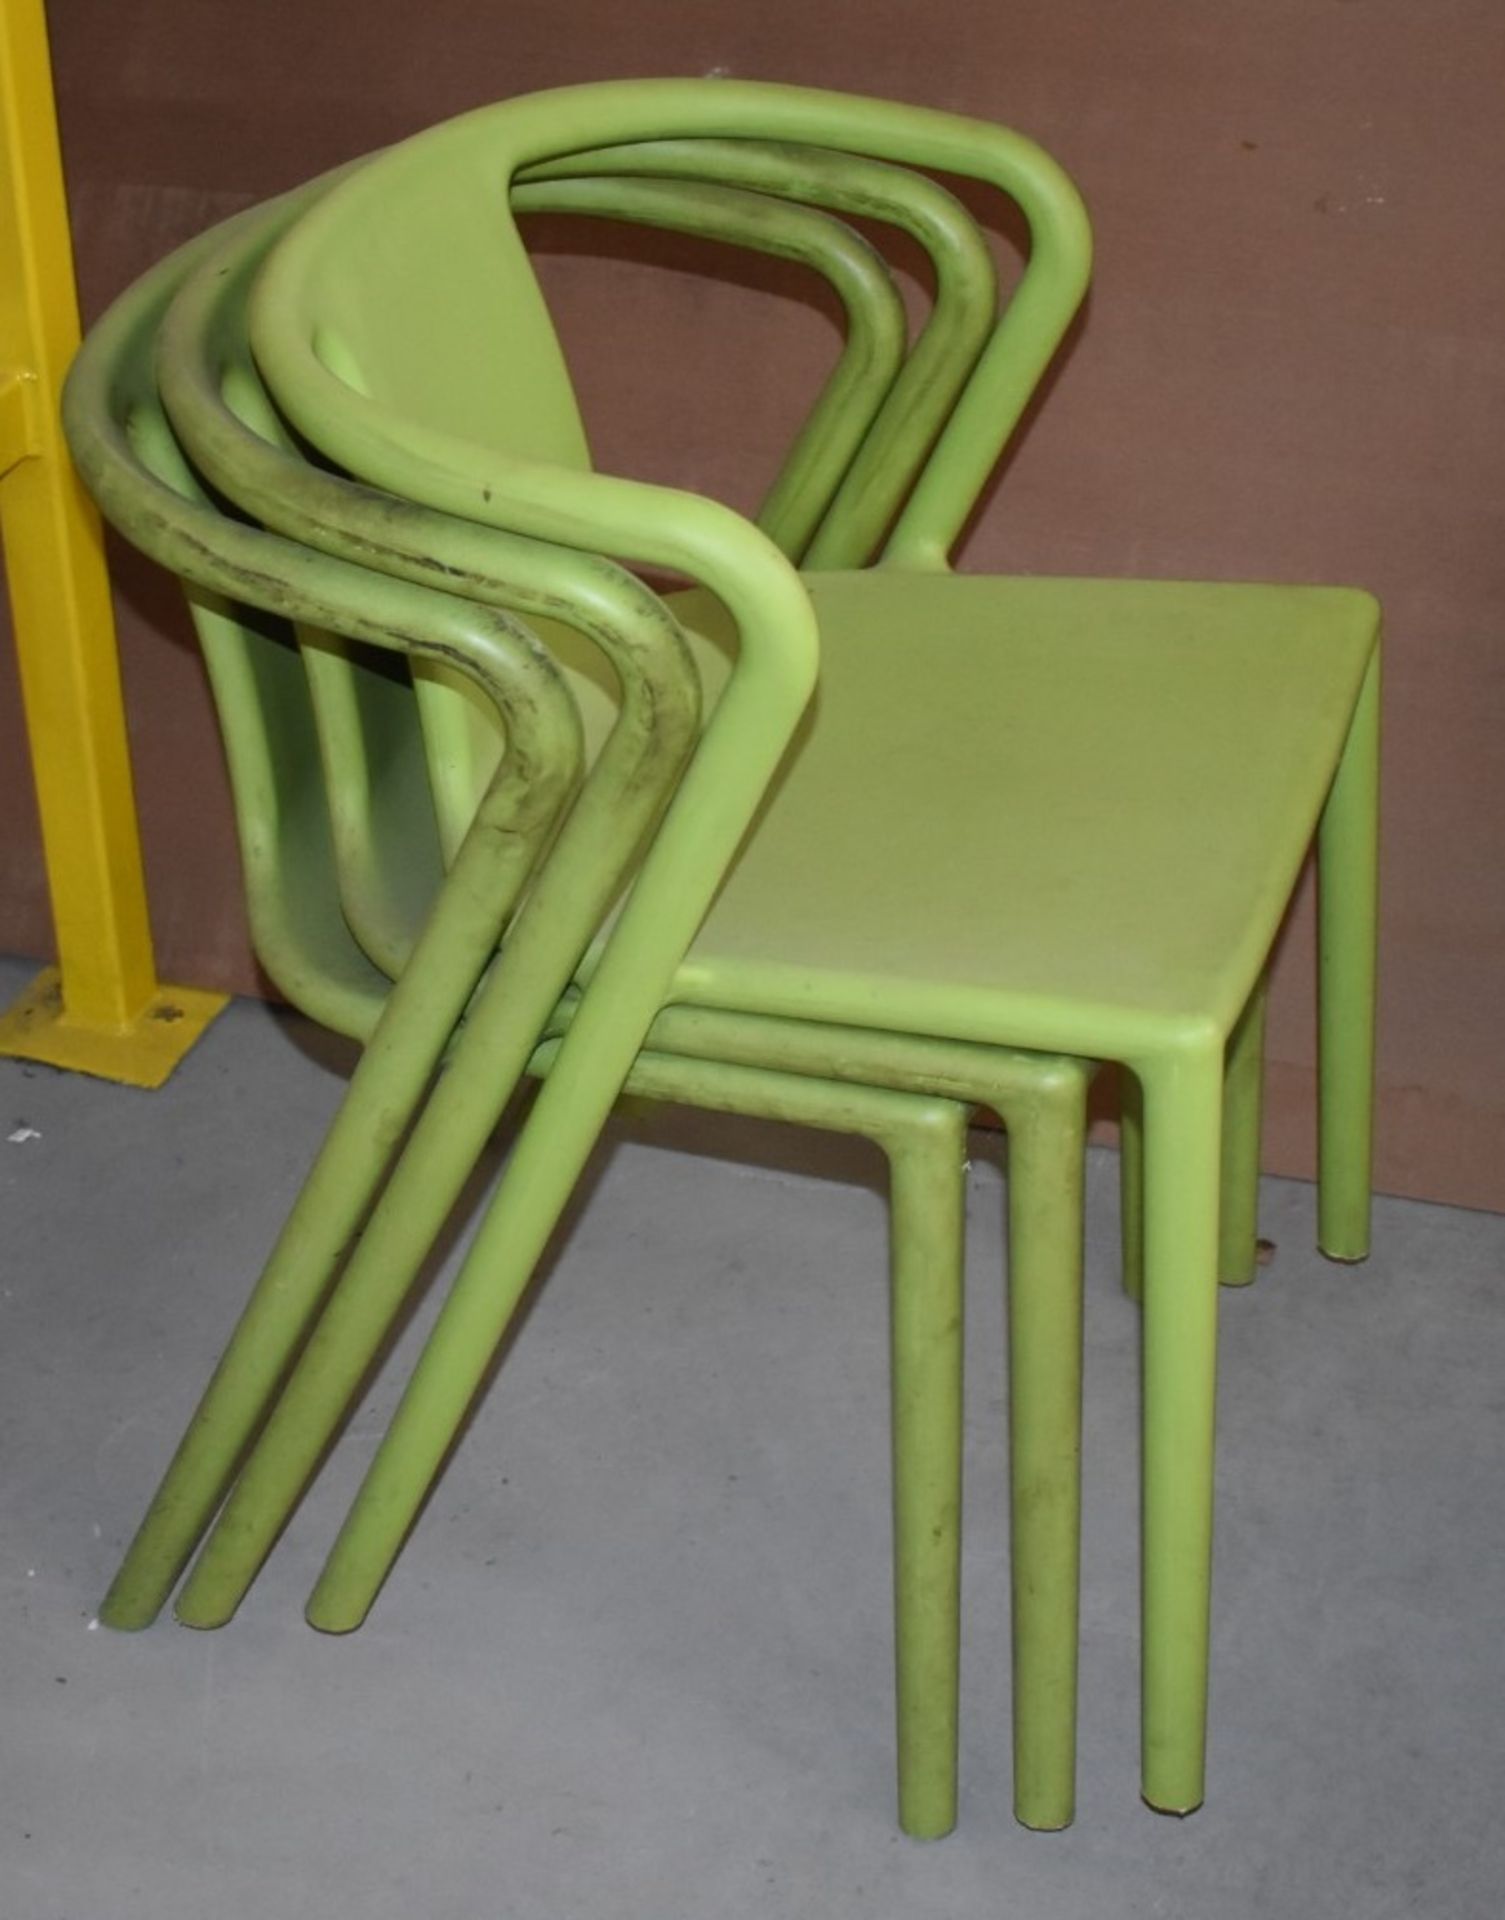 3 x Contemporary Outdoor Garden Chairs in Green - Ref WH - CL530 - Location: Leicestershire, LE12 - Image 2 of 2